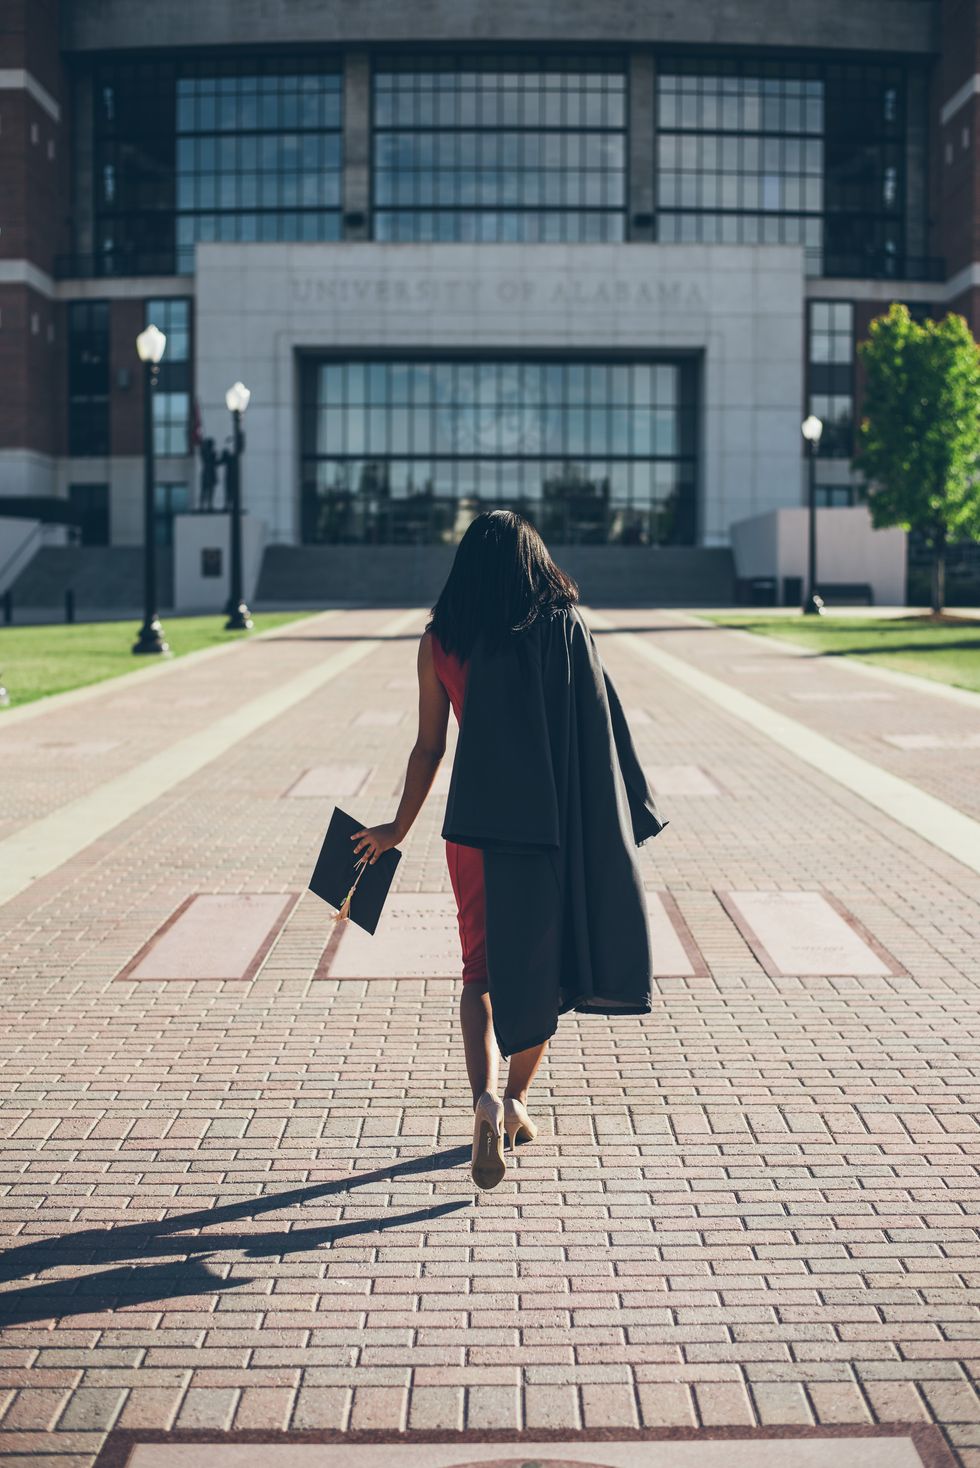 5 Tips About College From A Post-Graduate